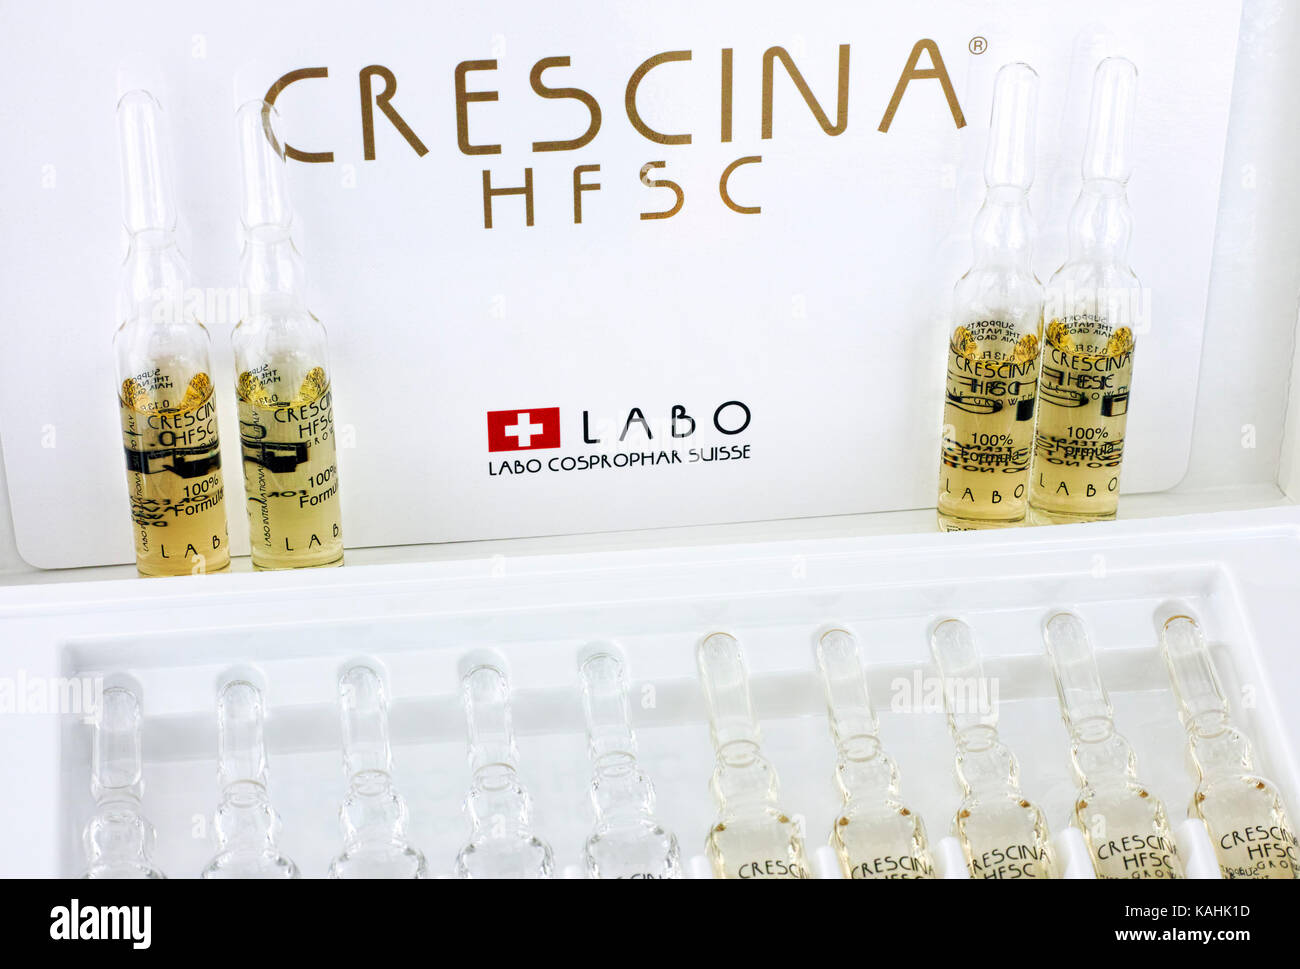 Paphos, Cyprus - November 13, 2015  Ampoules of Crescina HFSC Re-Growth in Crescina treatment box. Stock Photo